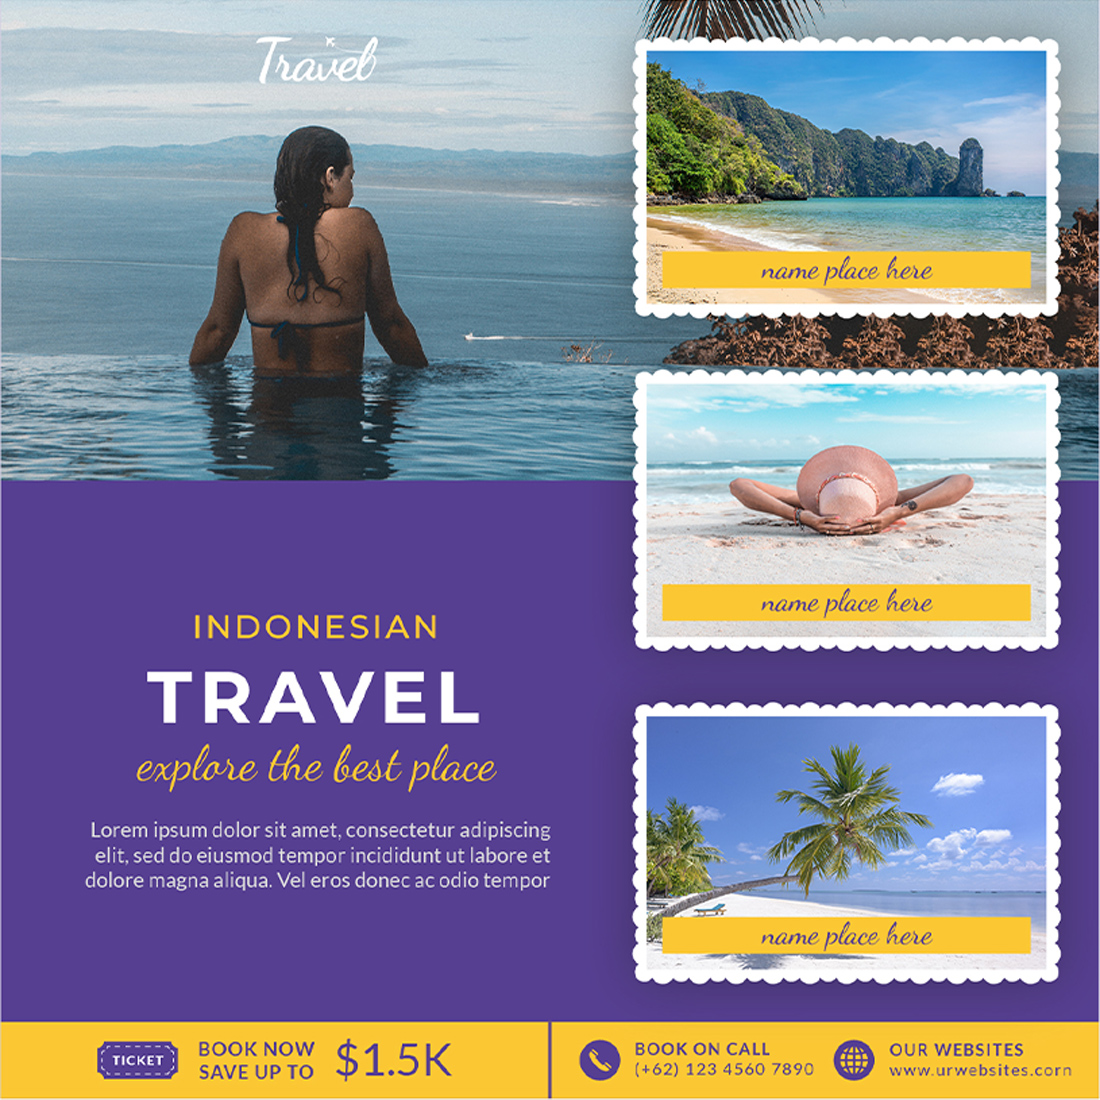 Travel & Tourism Social Media Post Templates for your instagram.